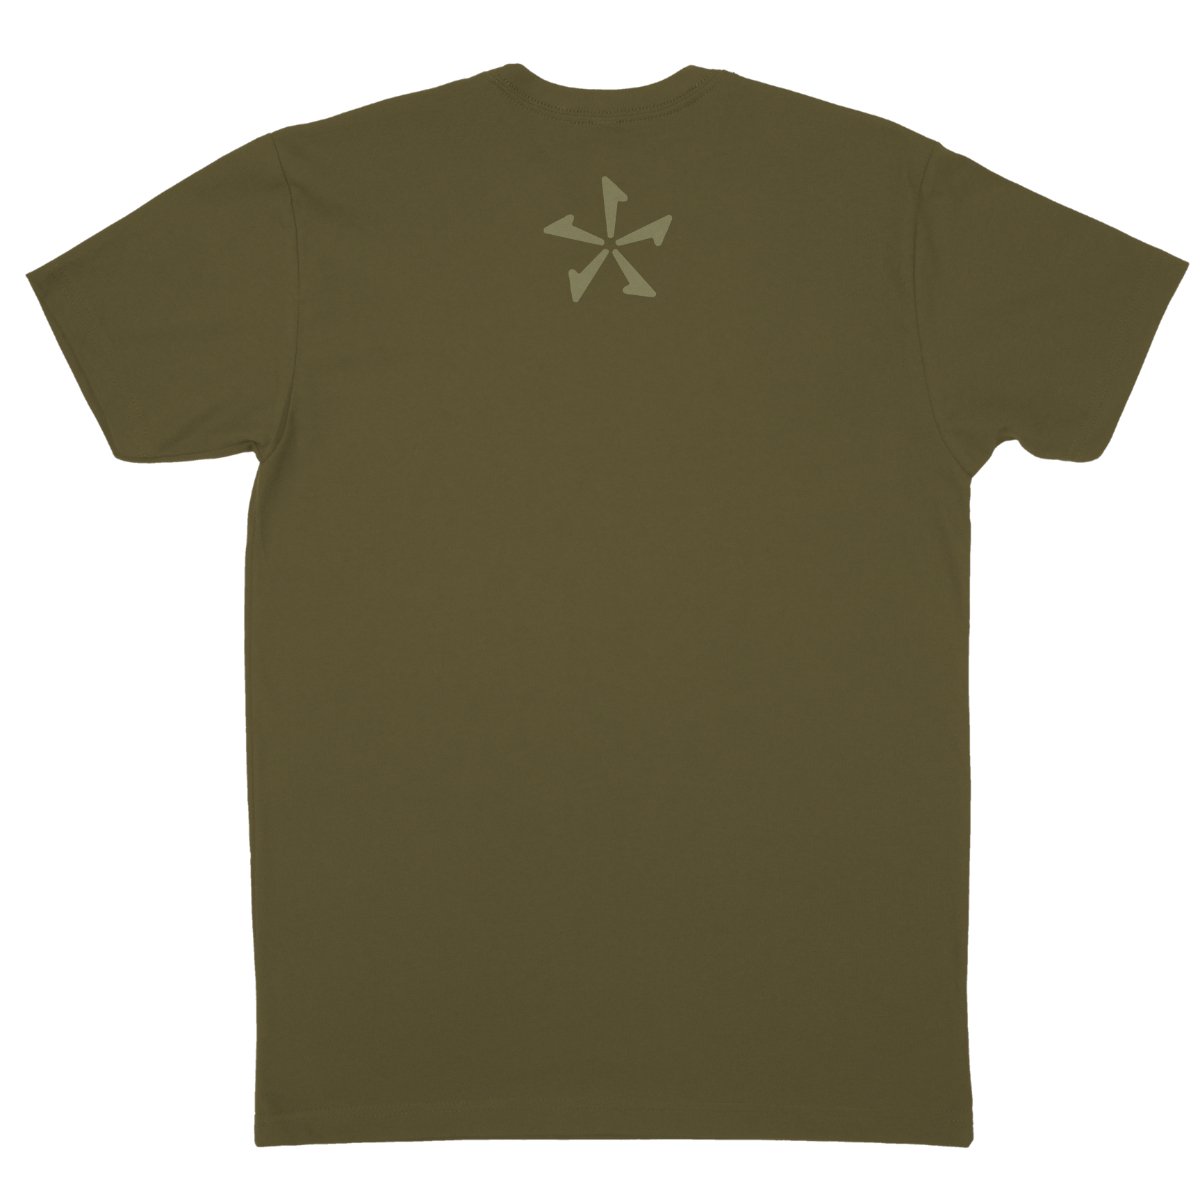 Phase 5 Squad Tee in Olive - BoardCo